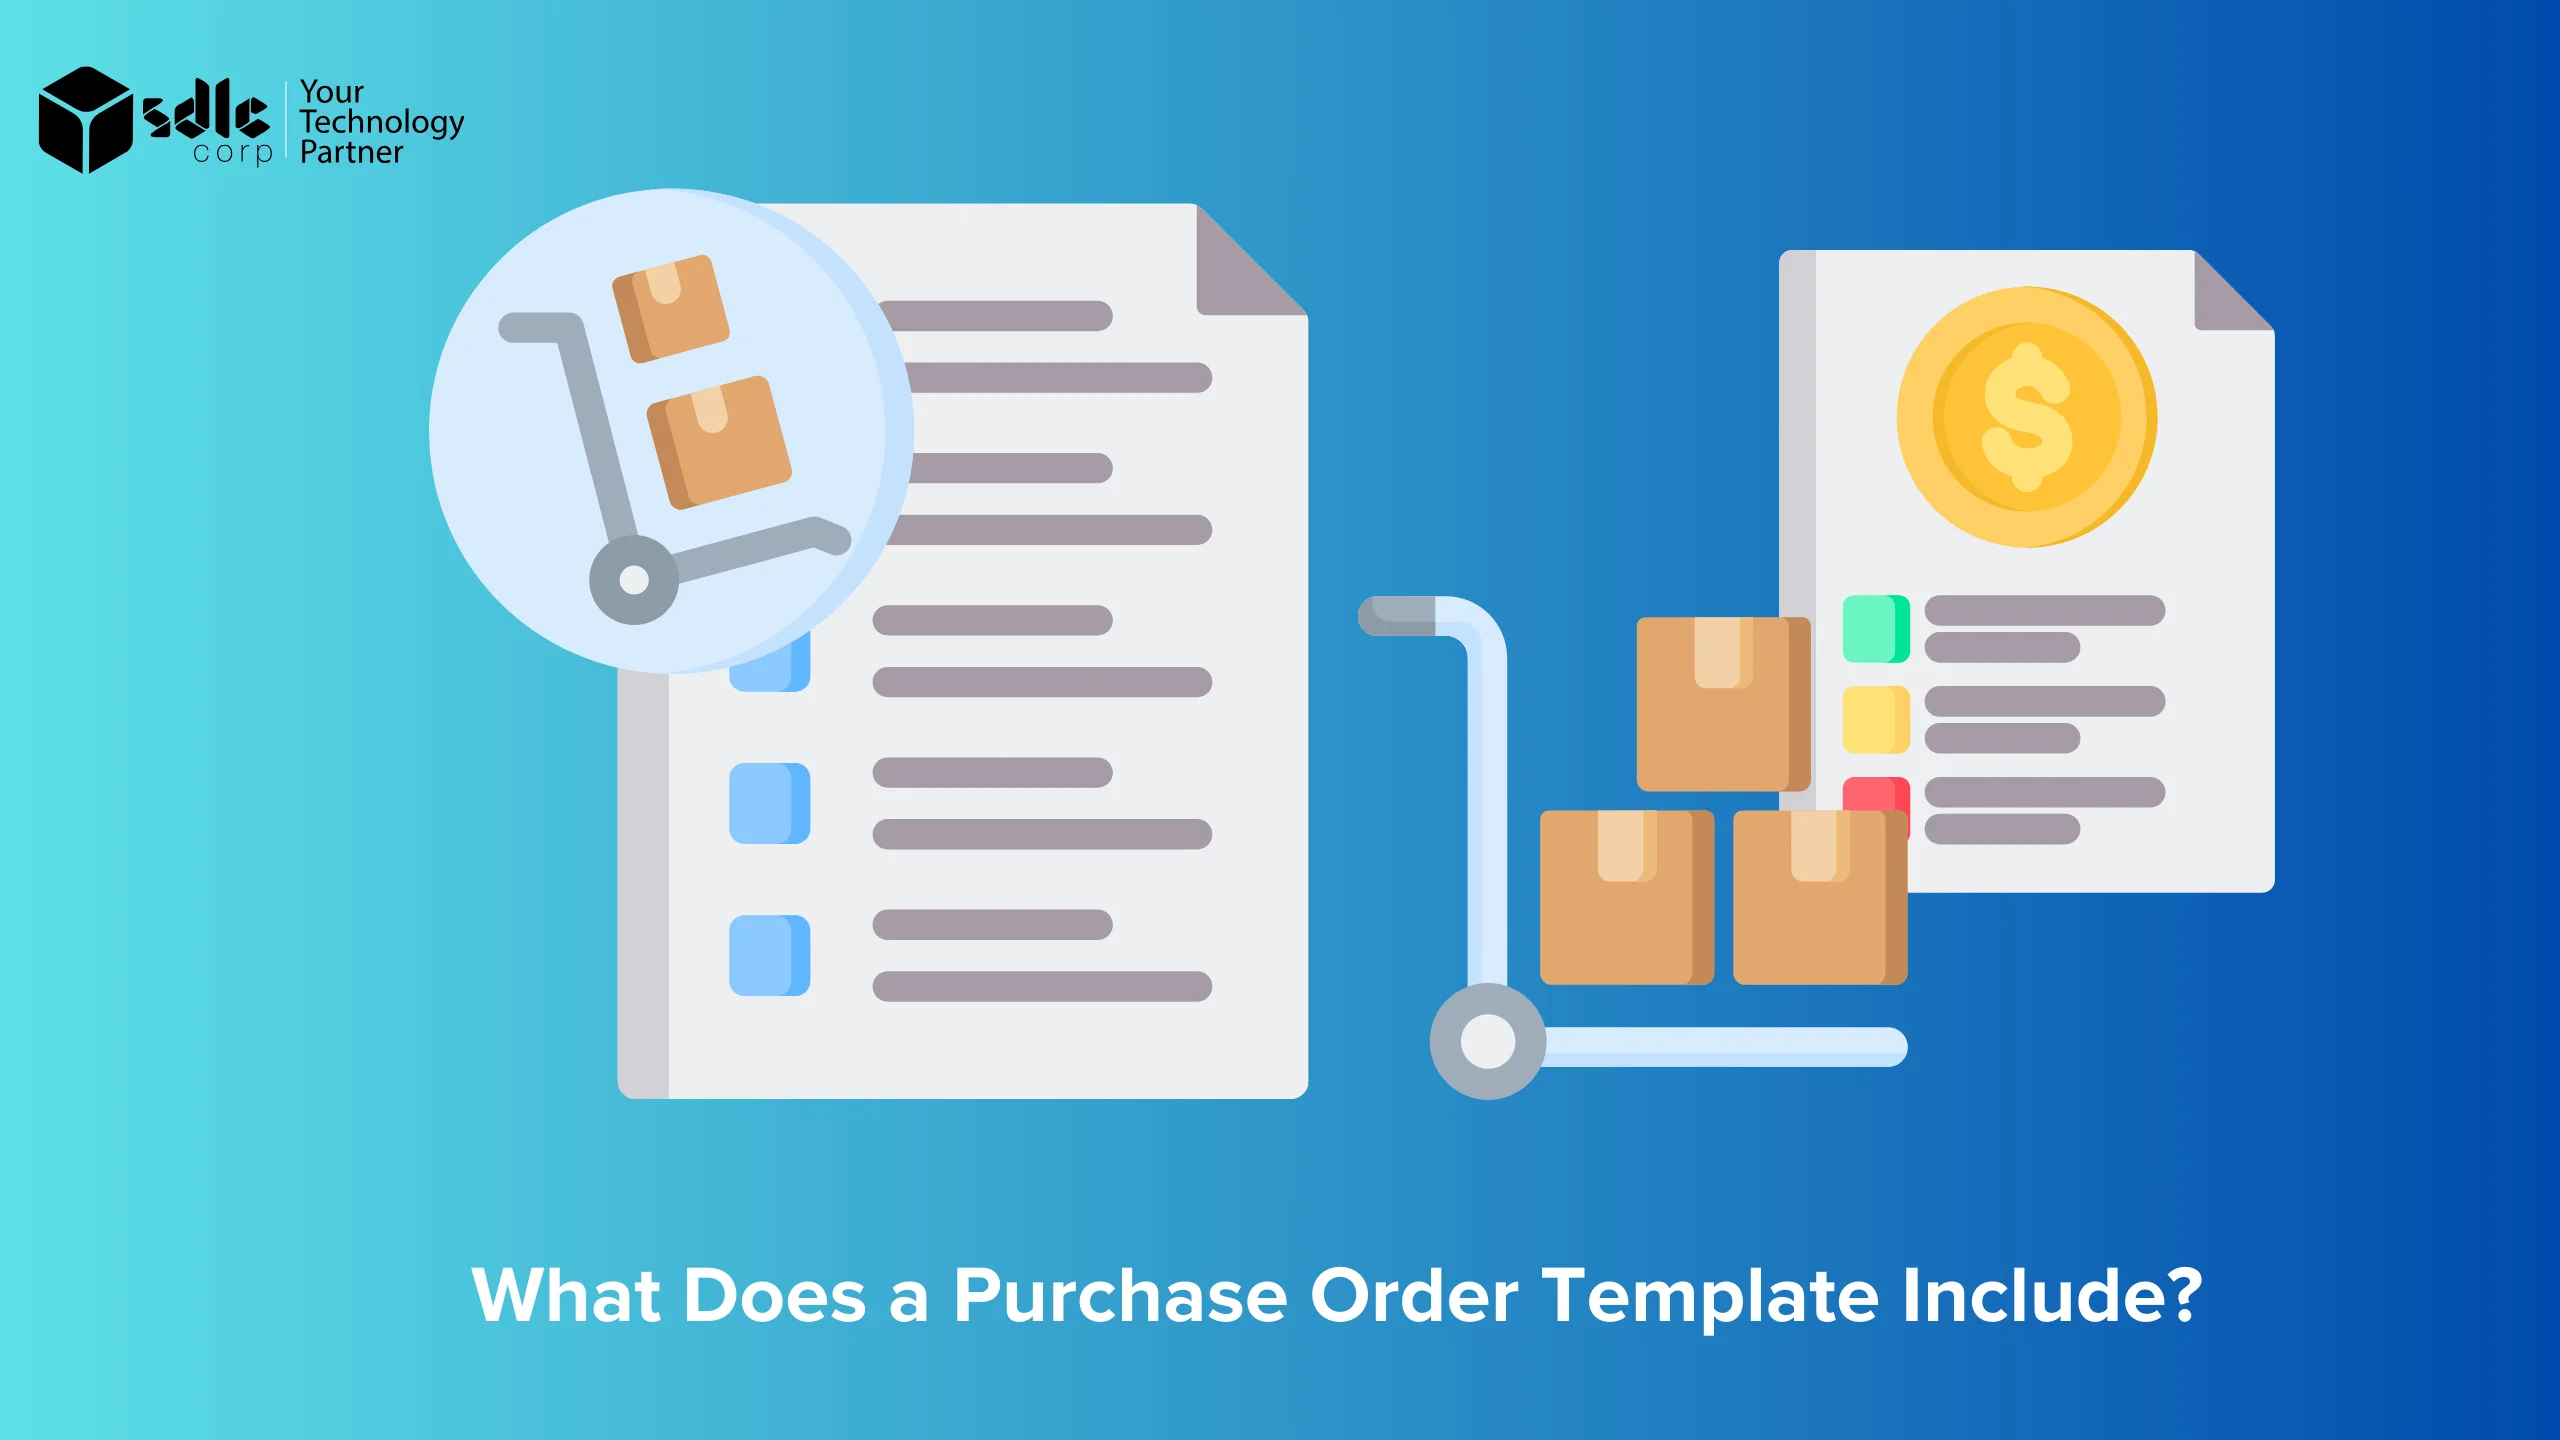 What Does a Purchase Order Template Include